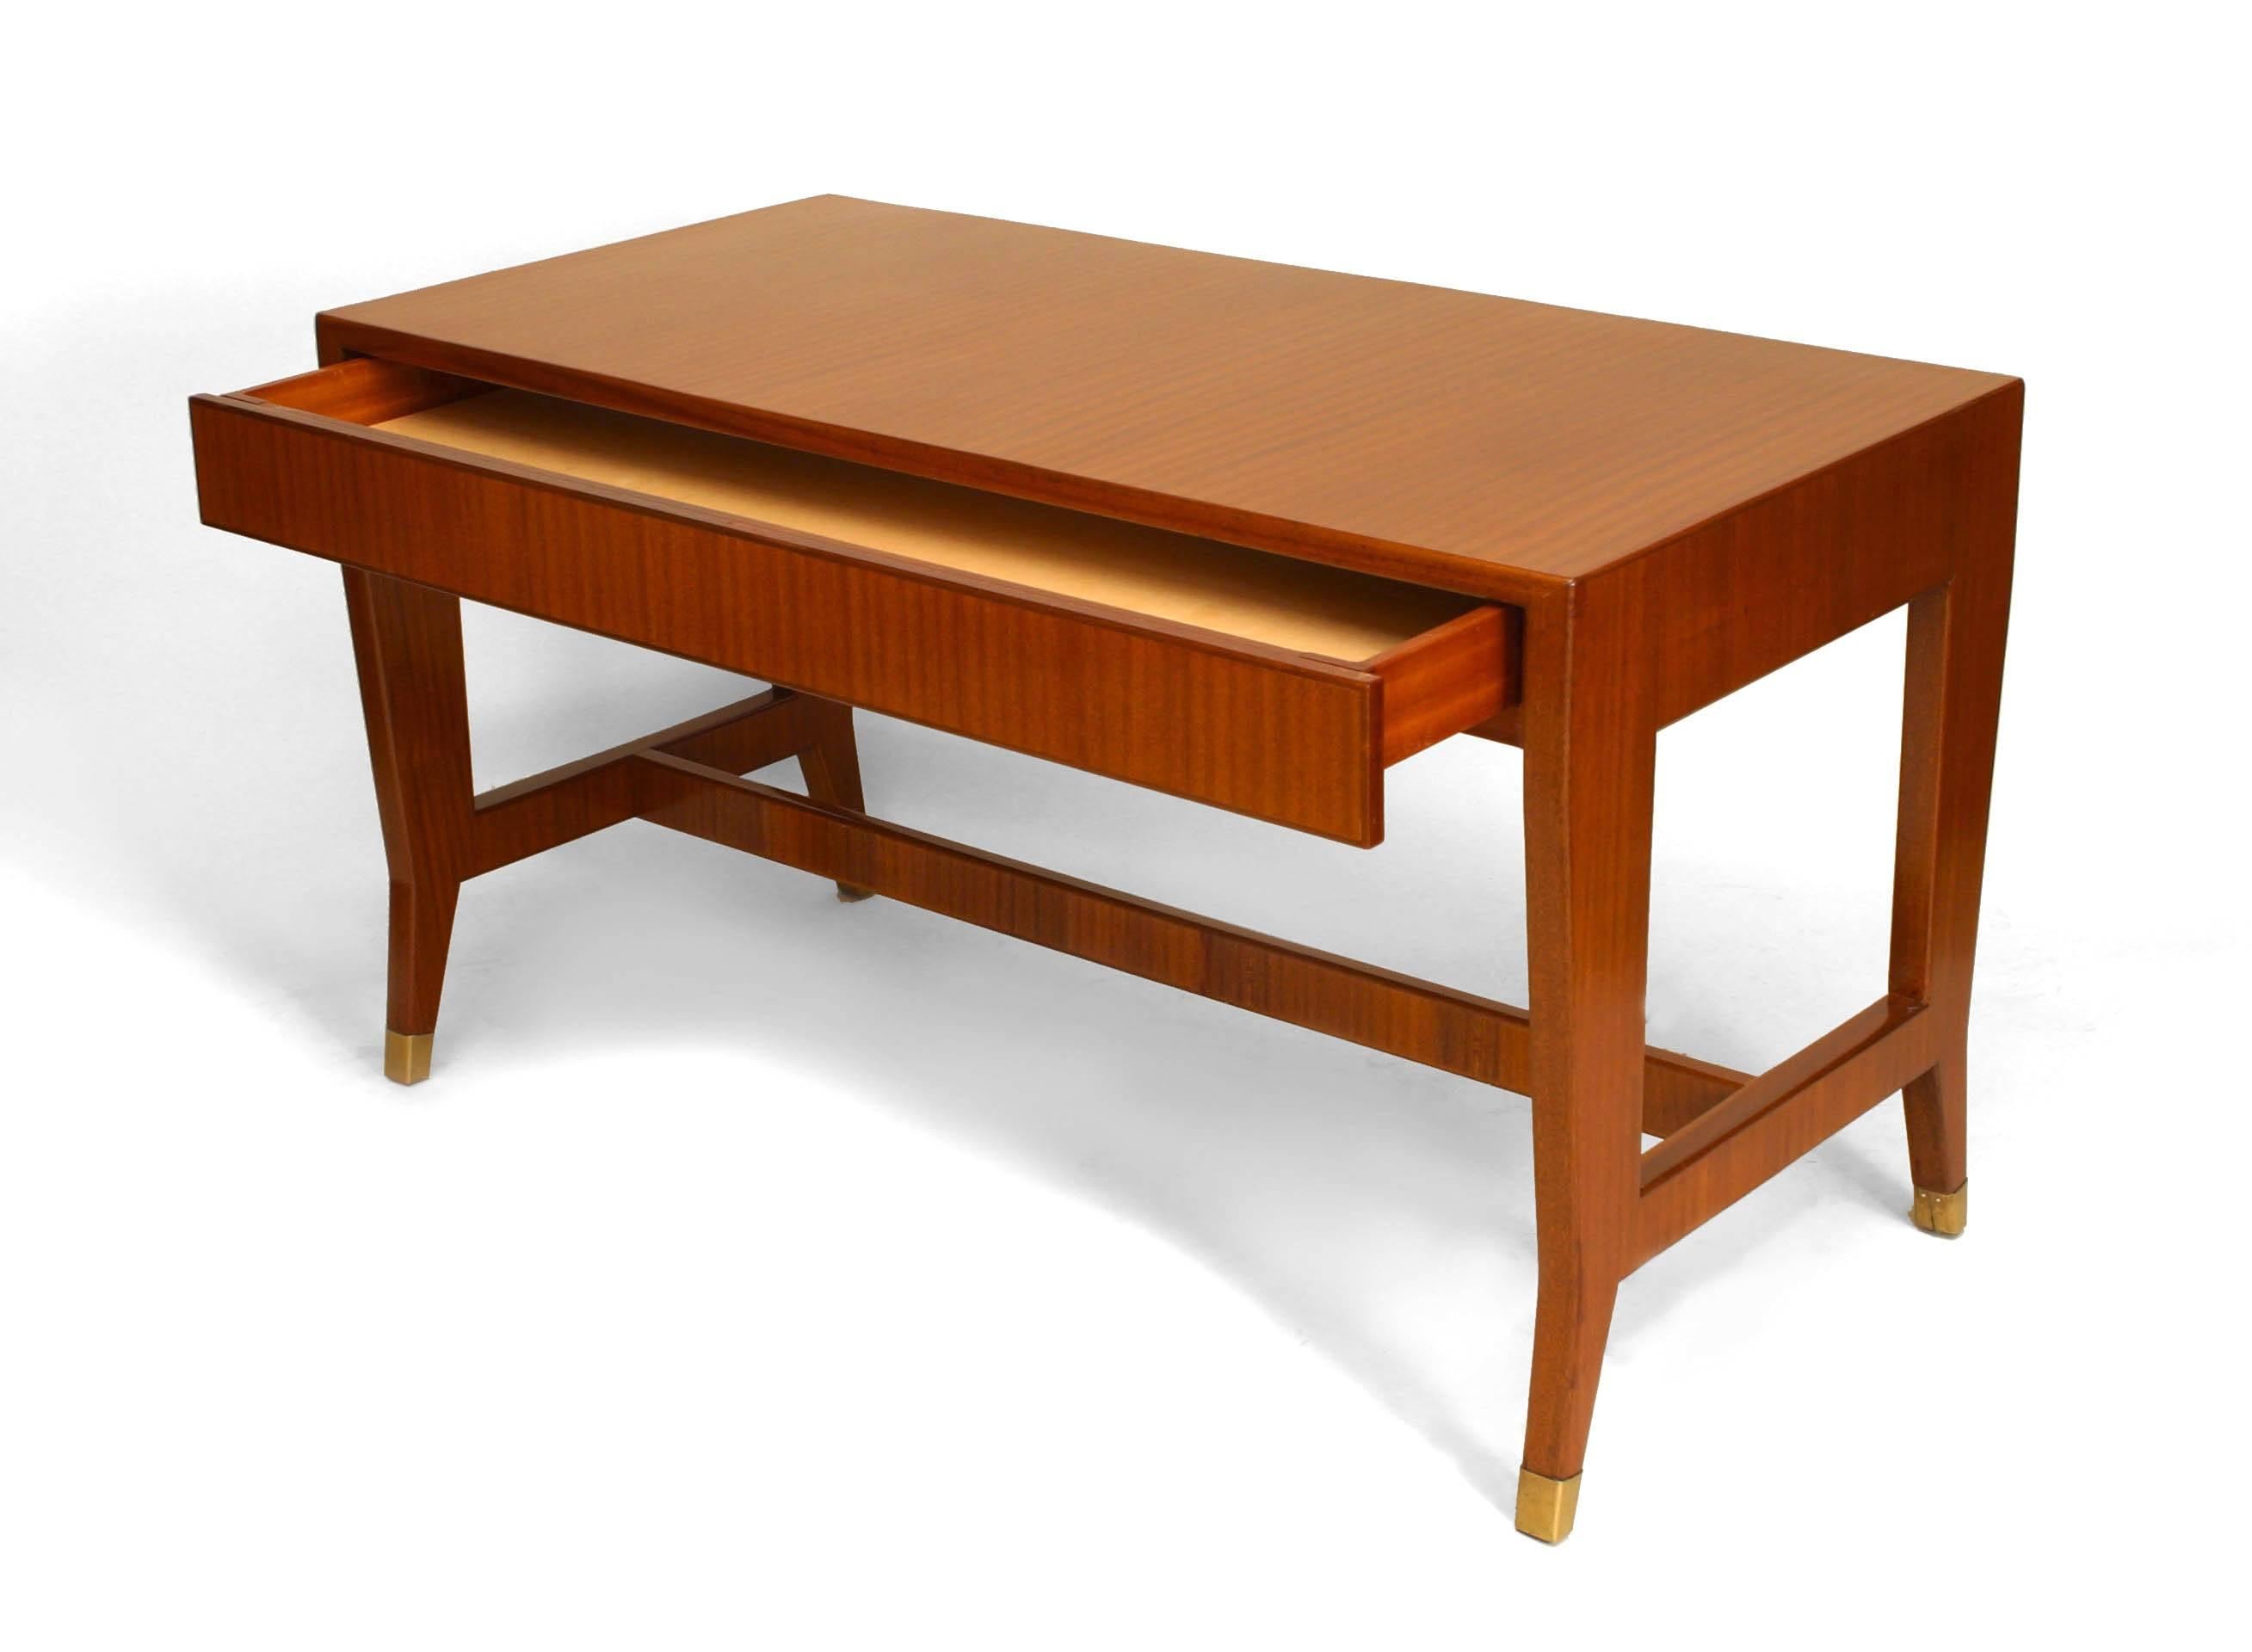 Italian 1930s mahogany table desk with geometric form legs with brass sabot feet and a single drawer with a stretcher (GIO PONTI - for the University of Padua)
